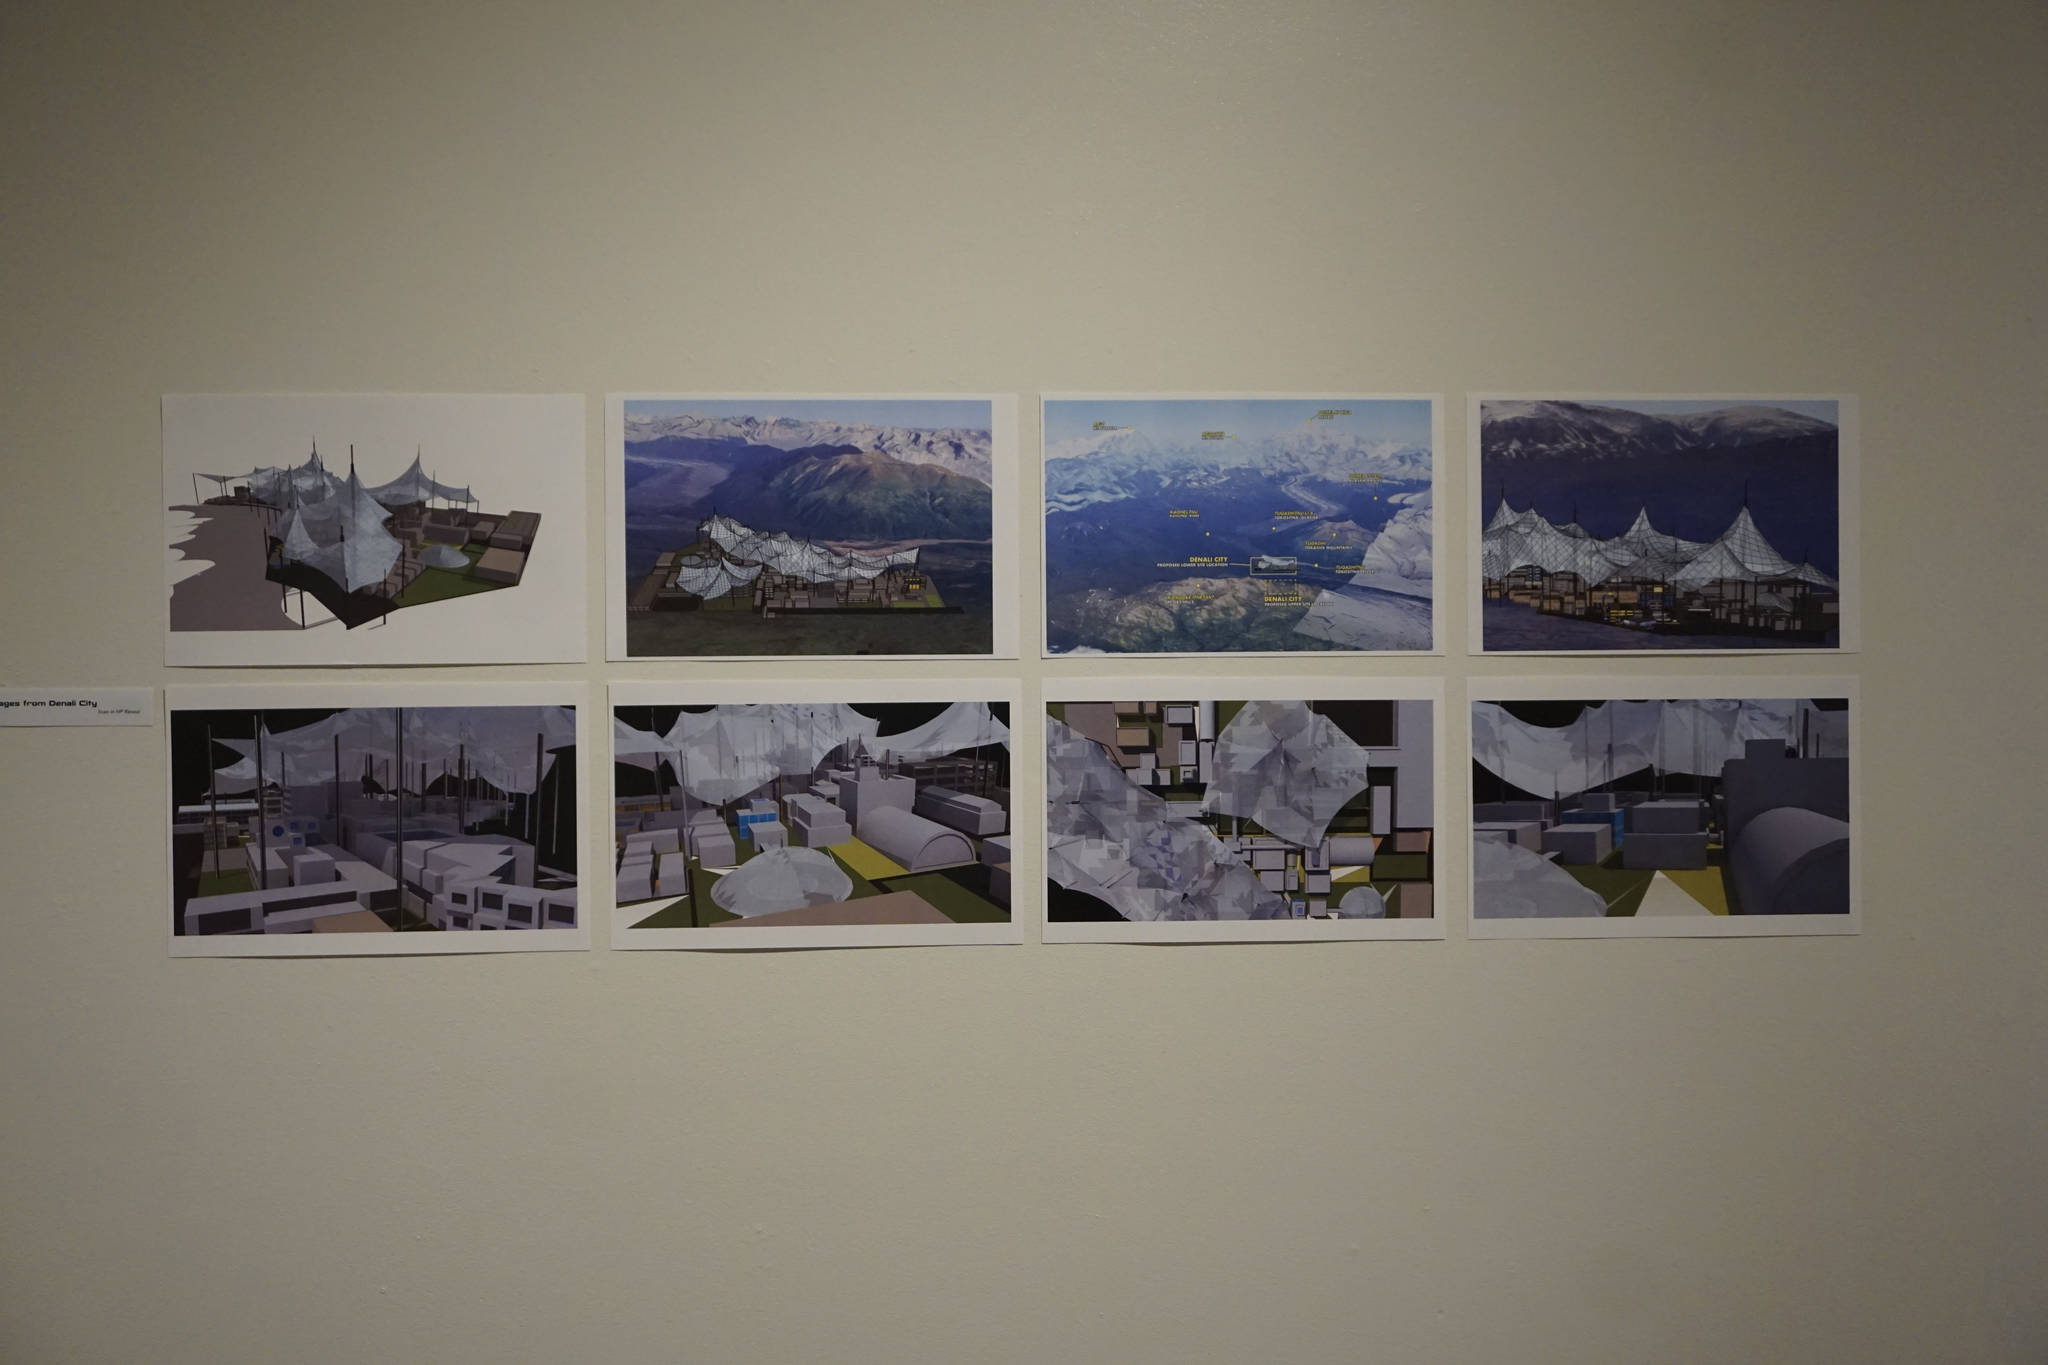 Illustrations of three domed cities from the “Dirigibles of Denali” show at the Pratt Museum at the July 6, 2018 First Friday opening in Homer, Alaska. (Photo by Michael Armstrong/Homer News)